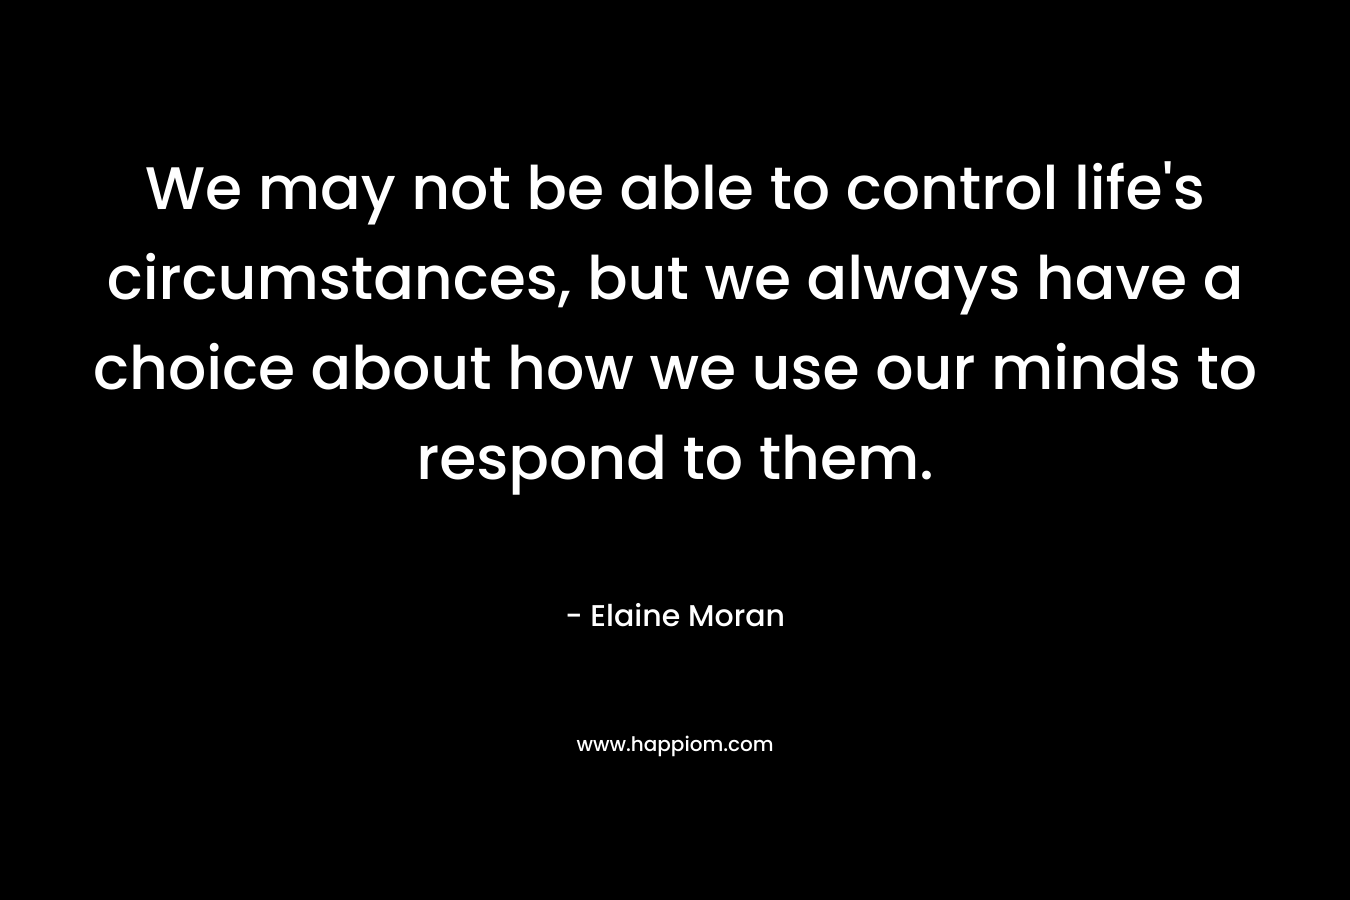 We may not be able to control life's circumstances, but we always have a choice about how we use our minds to respond to them.